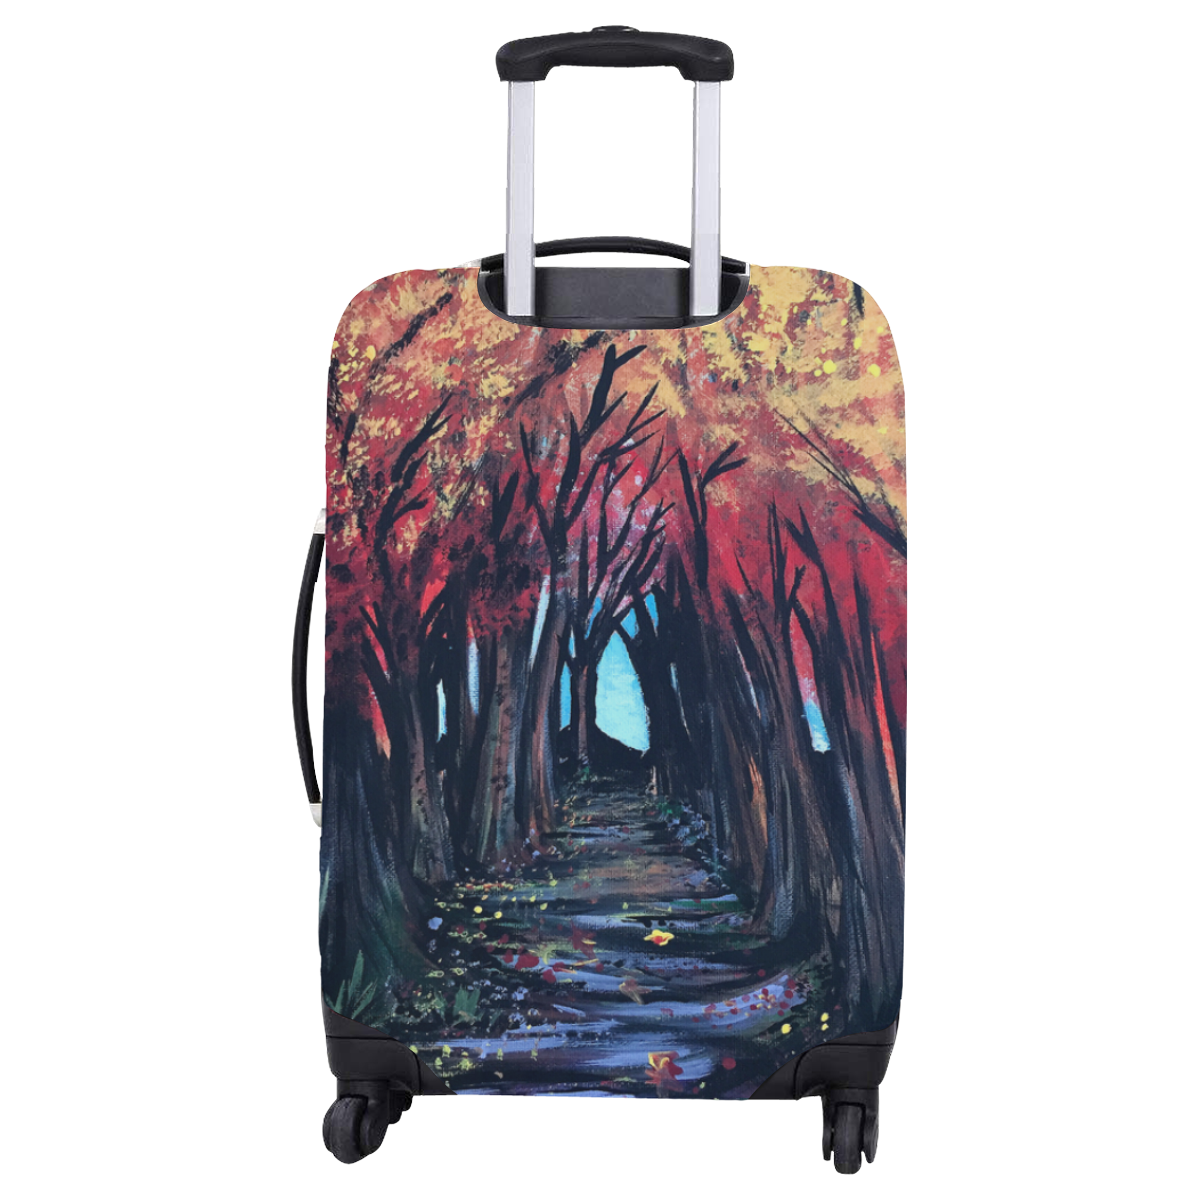 Autumn Day Luggage Cover/Large 26"-28"